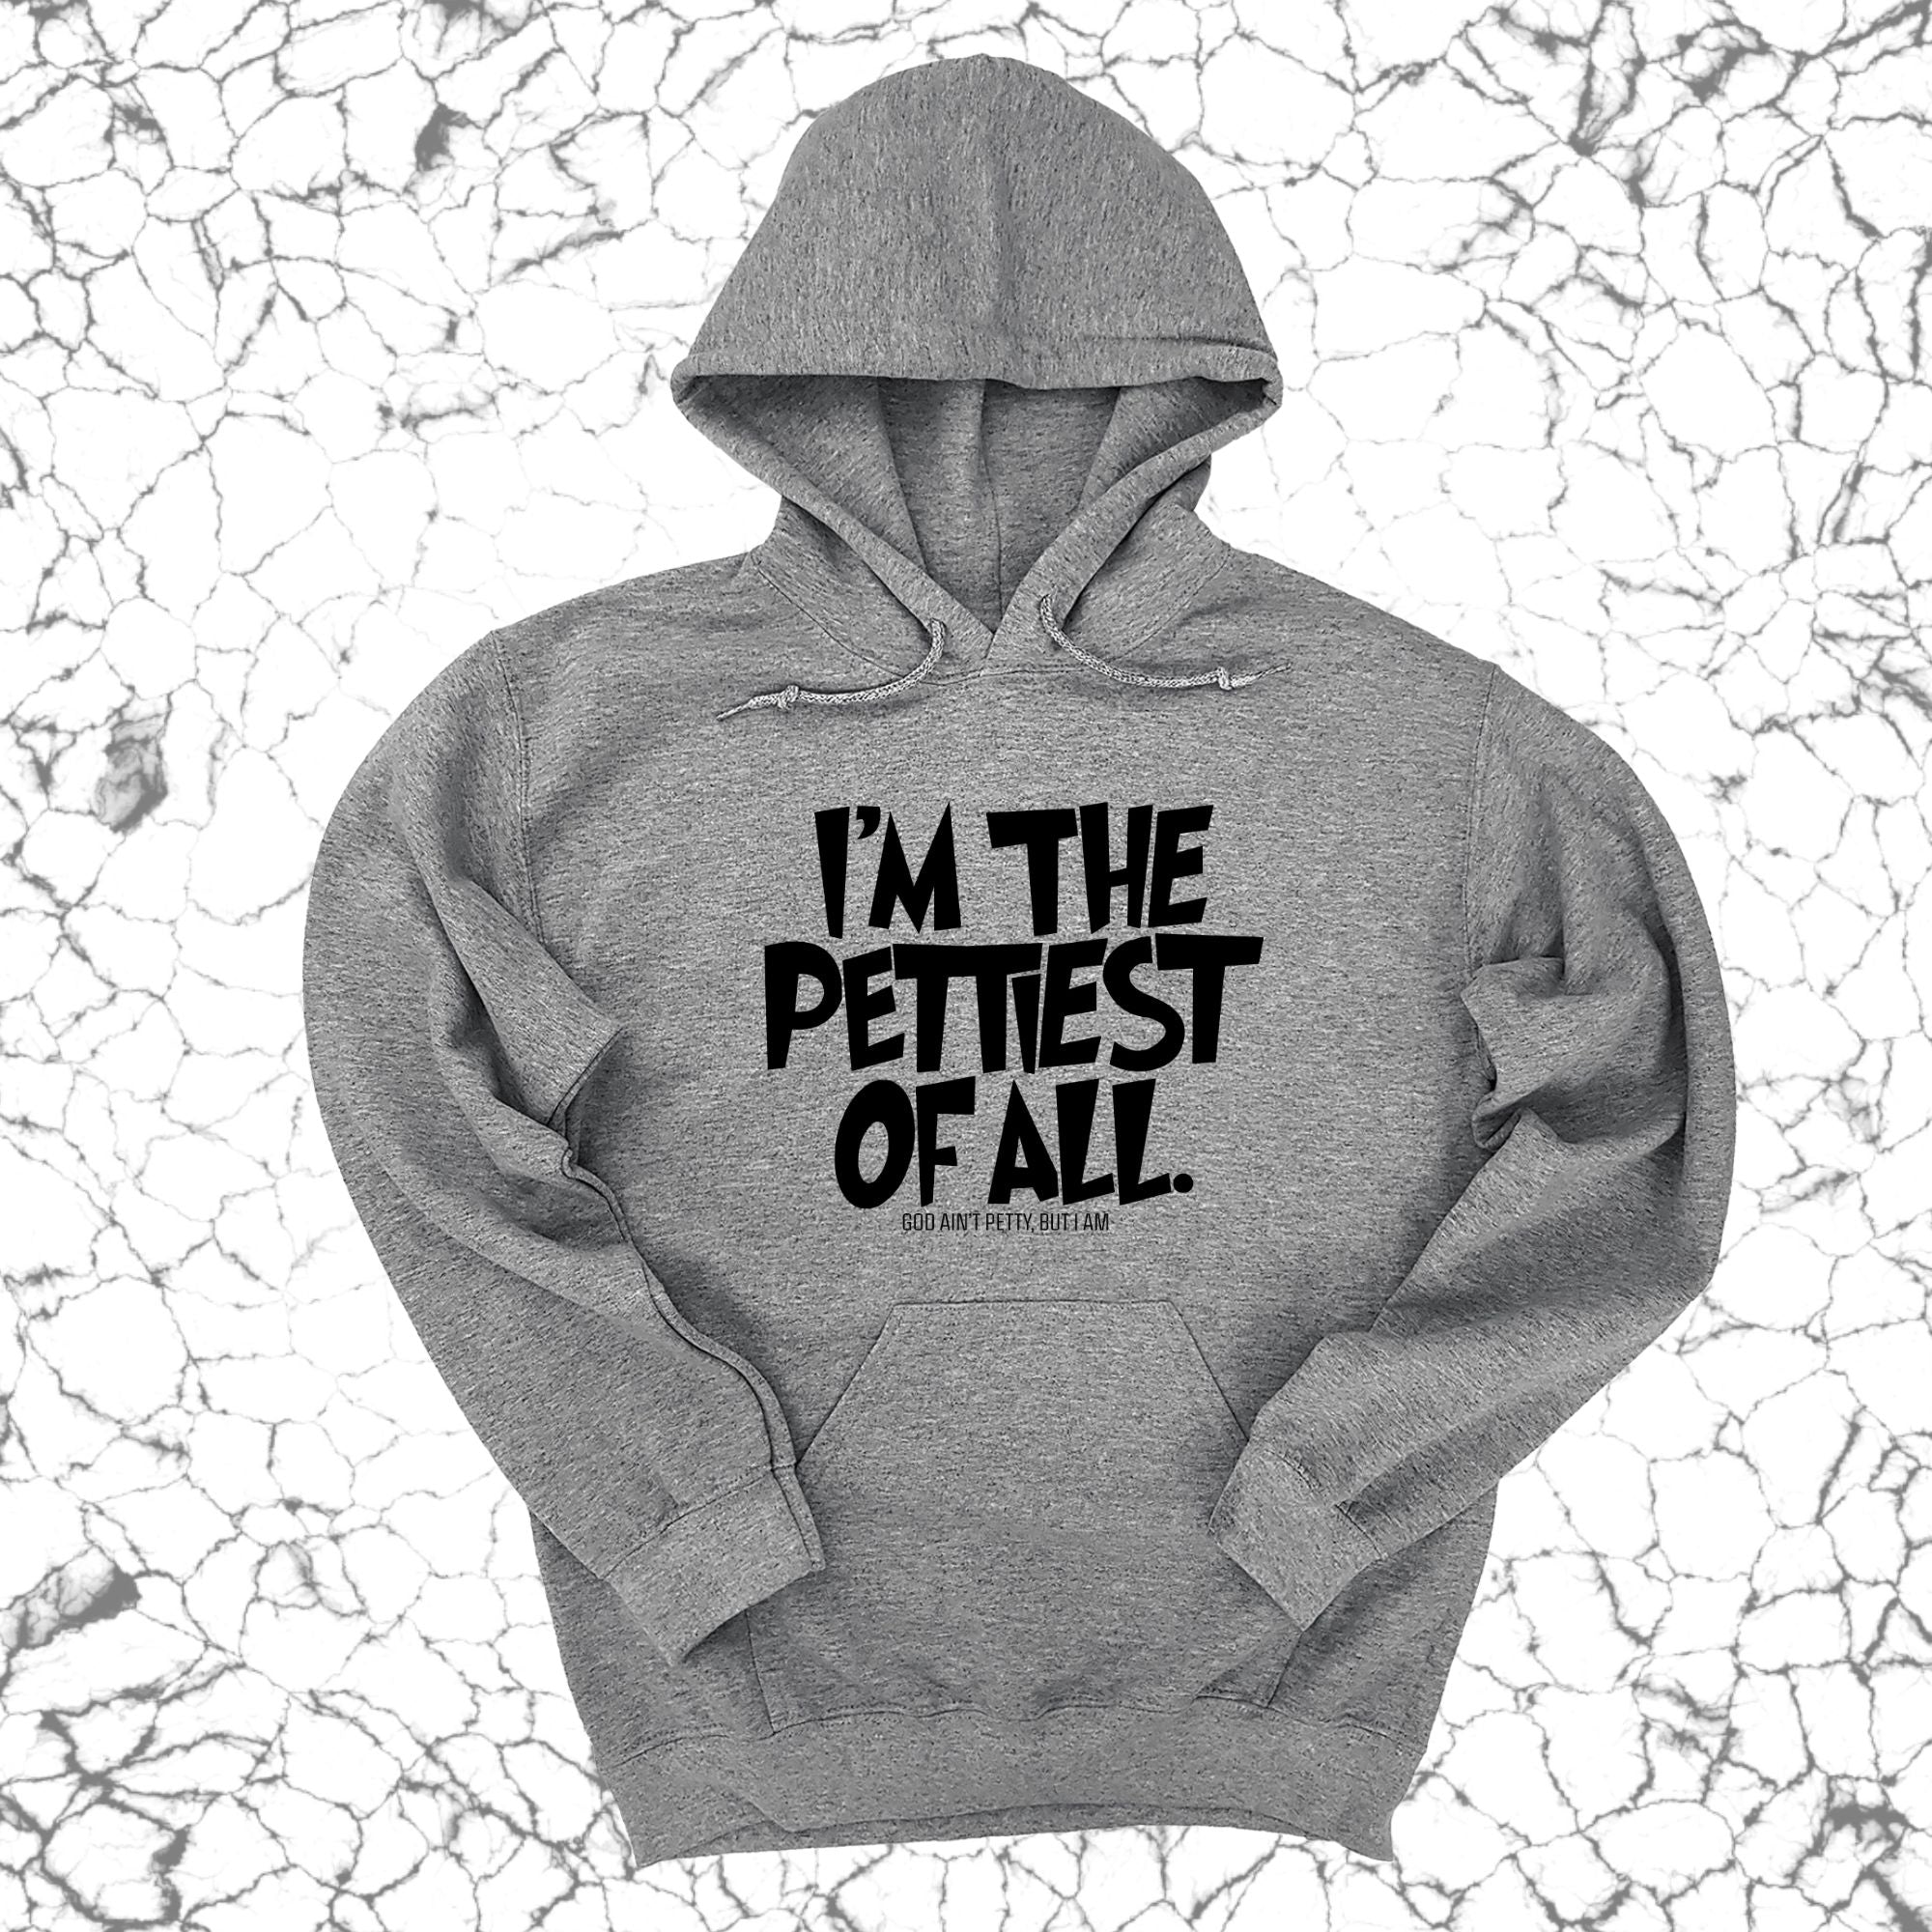 I'm Pettiest of All Unisex Hoodie-Hoodie-The Original God Ain't Petty But I Am